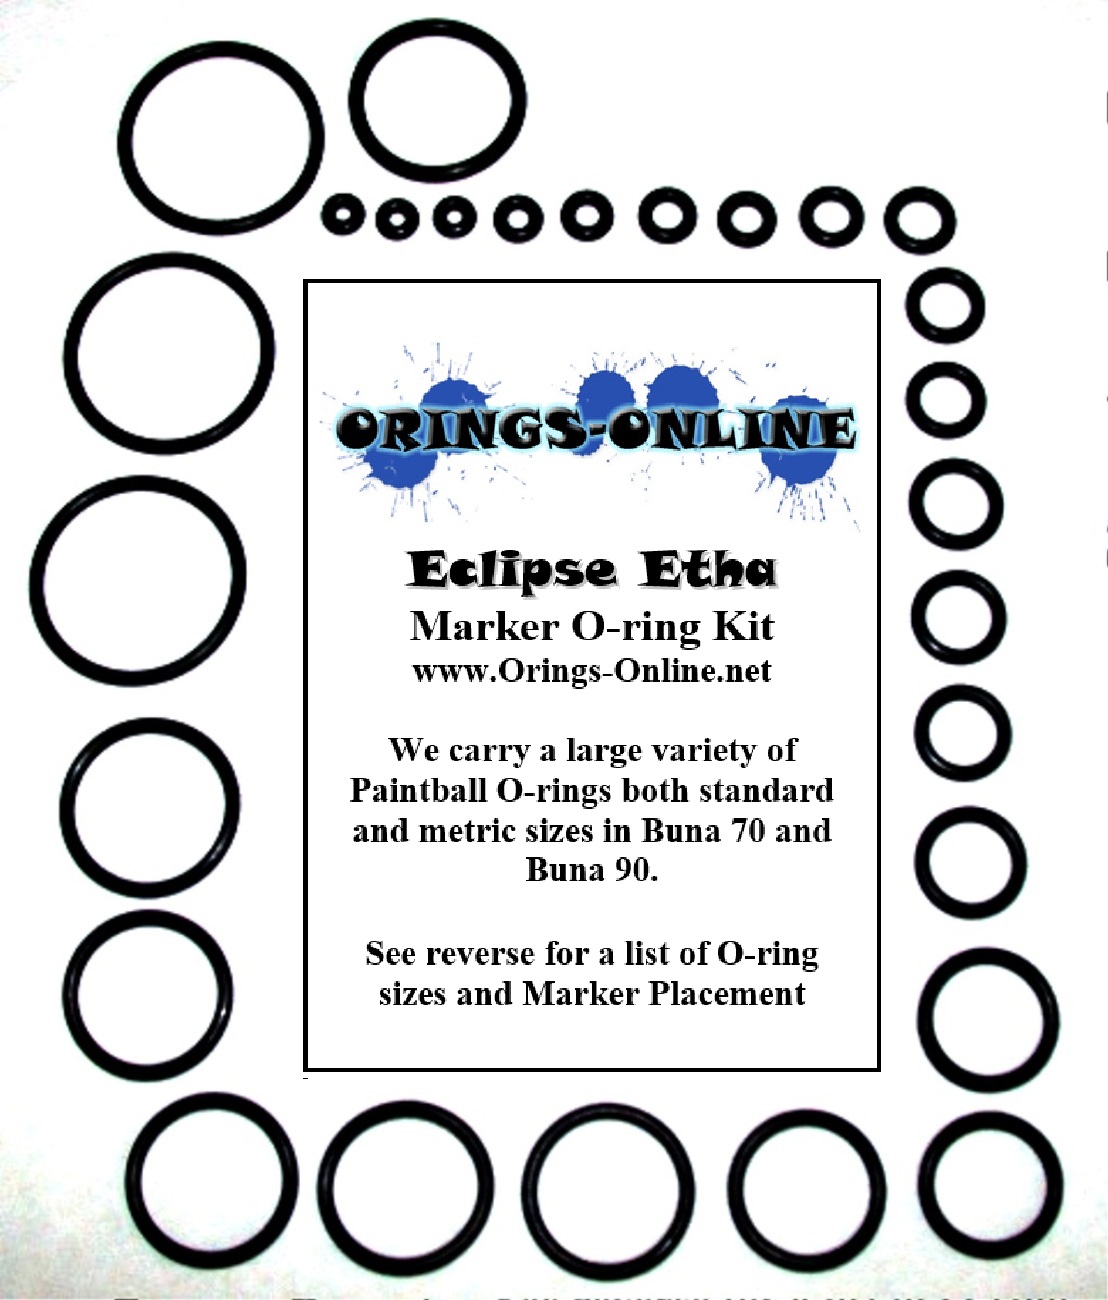 Planet Eclipse Etha Marker O-ring Kit